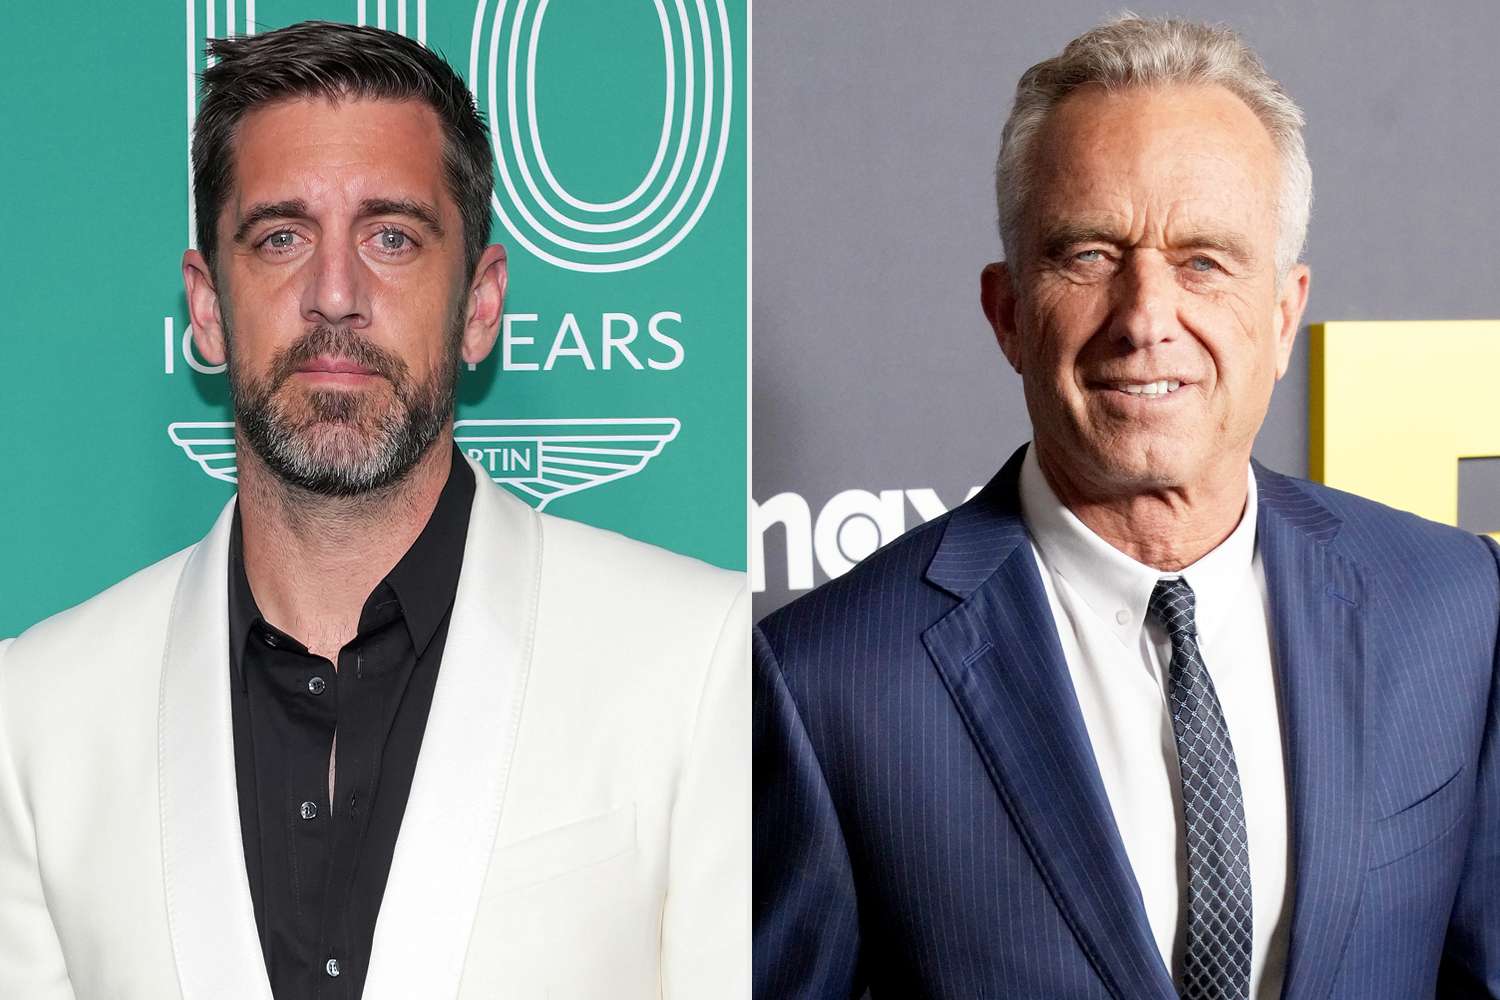 Aaron Rodgers Says He Passed on Being RFK Jr.'s Running Mate: 'I Wanna Keep Playing'